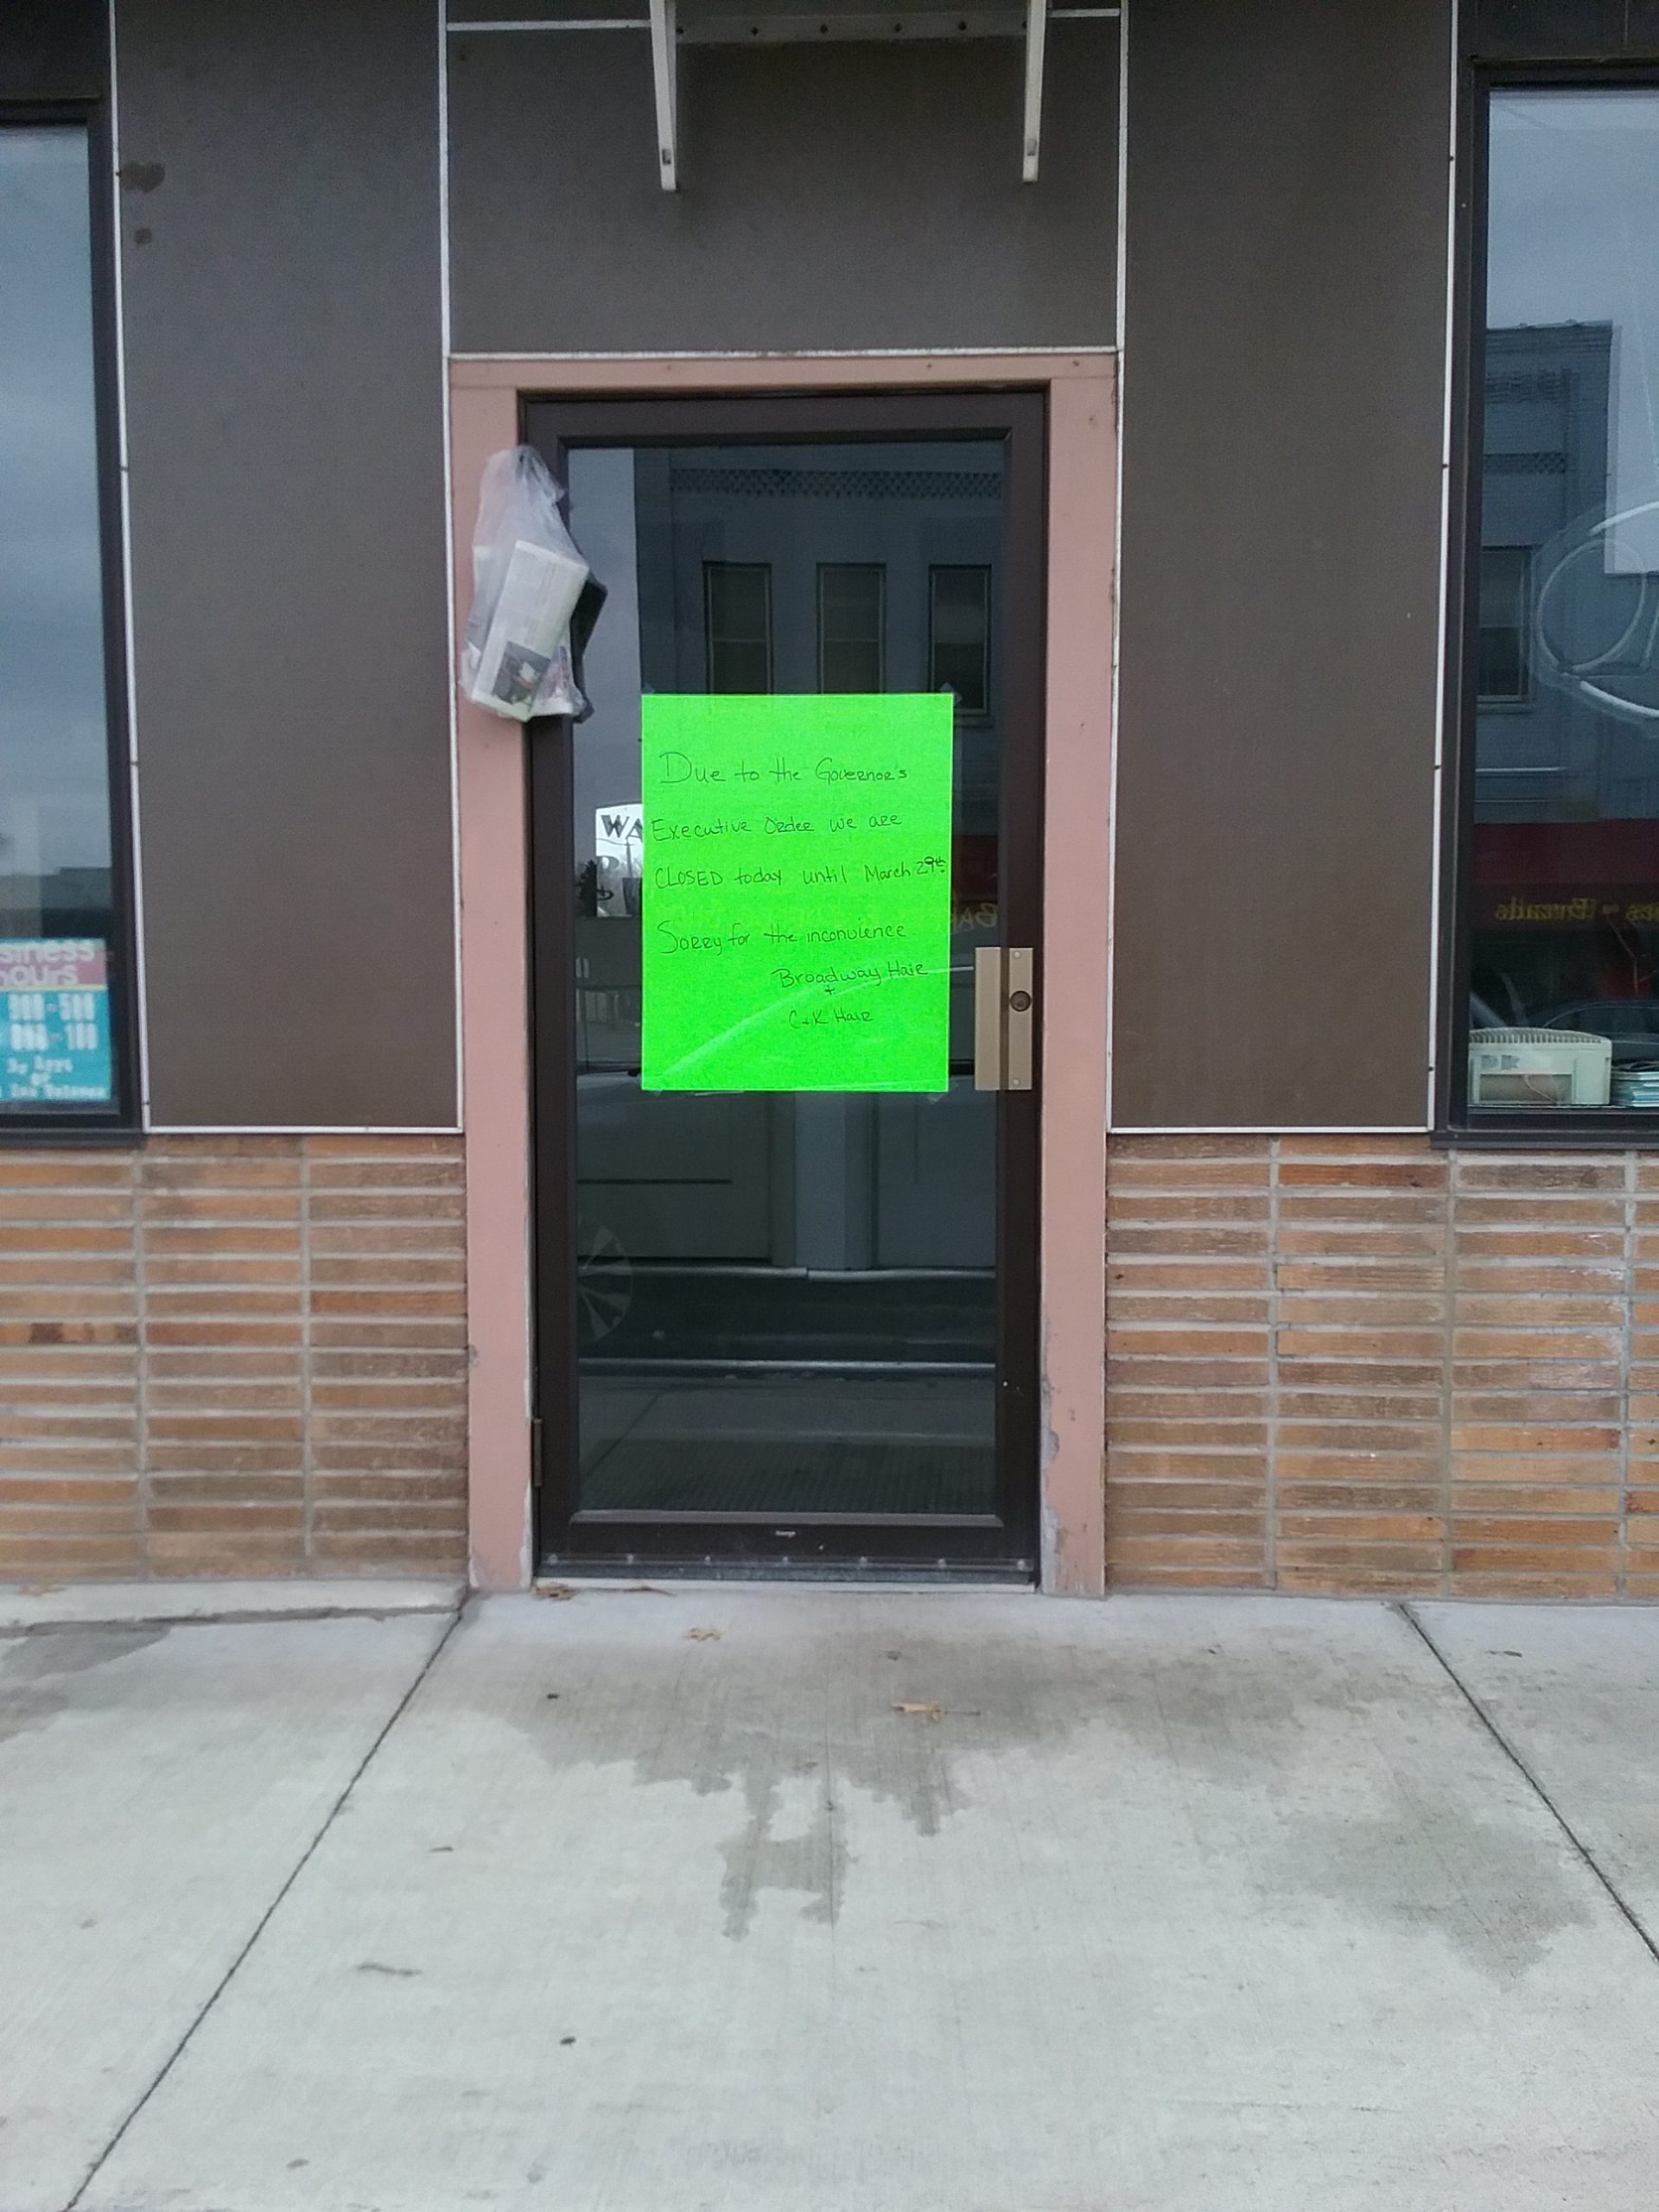 Sign on Little Falls hair salon indicating the business is closed due to Governor Tim Walz's executive order during the COVID-19 pandemic, March 25, 2020.